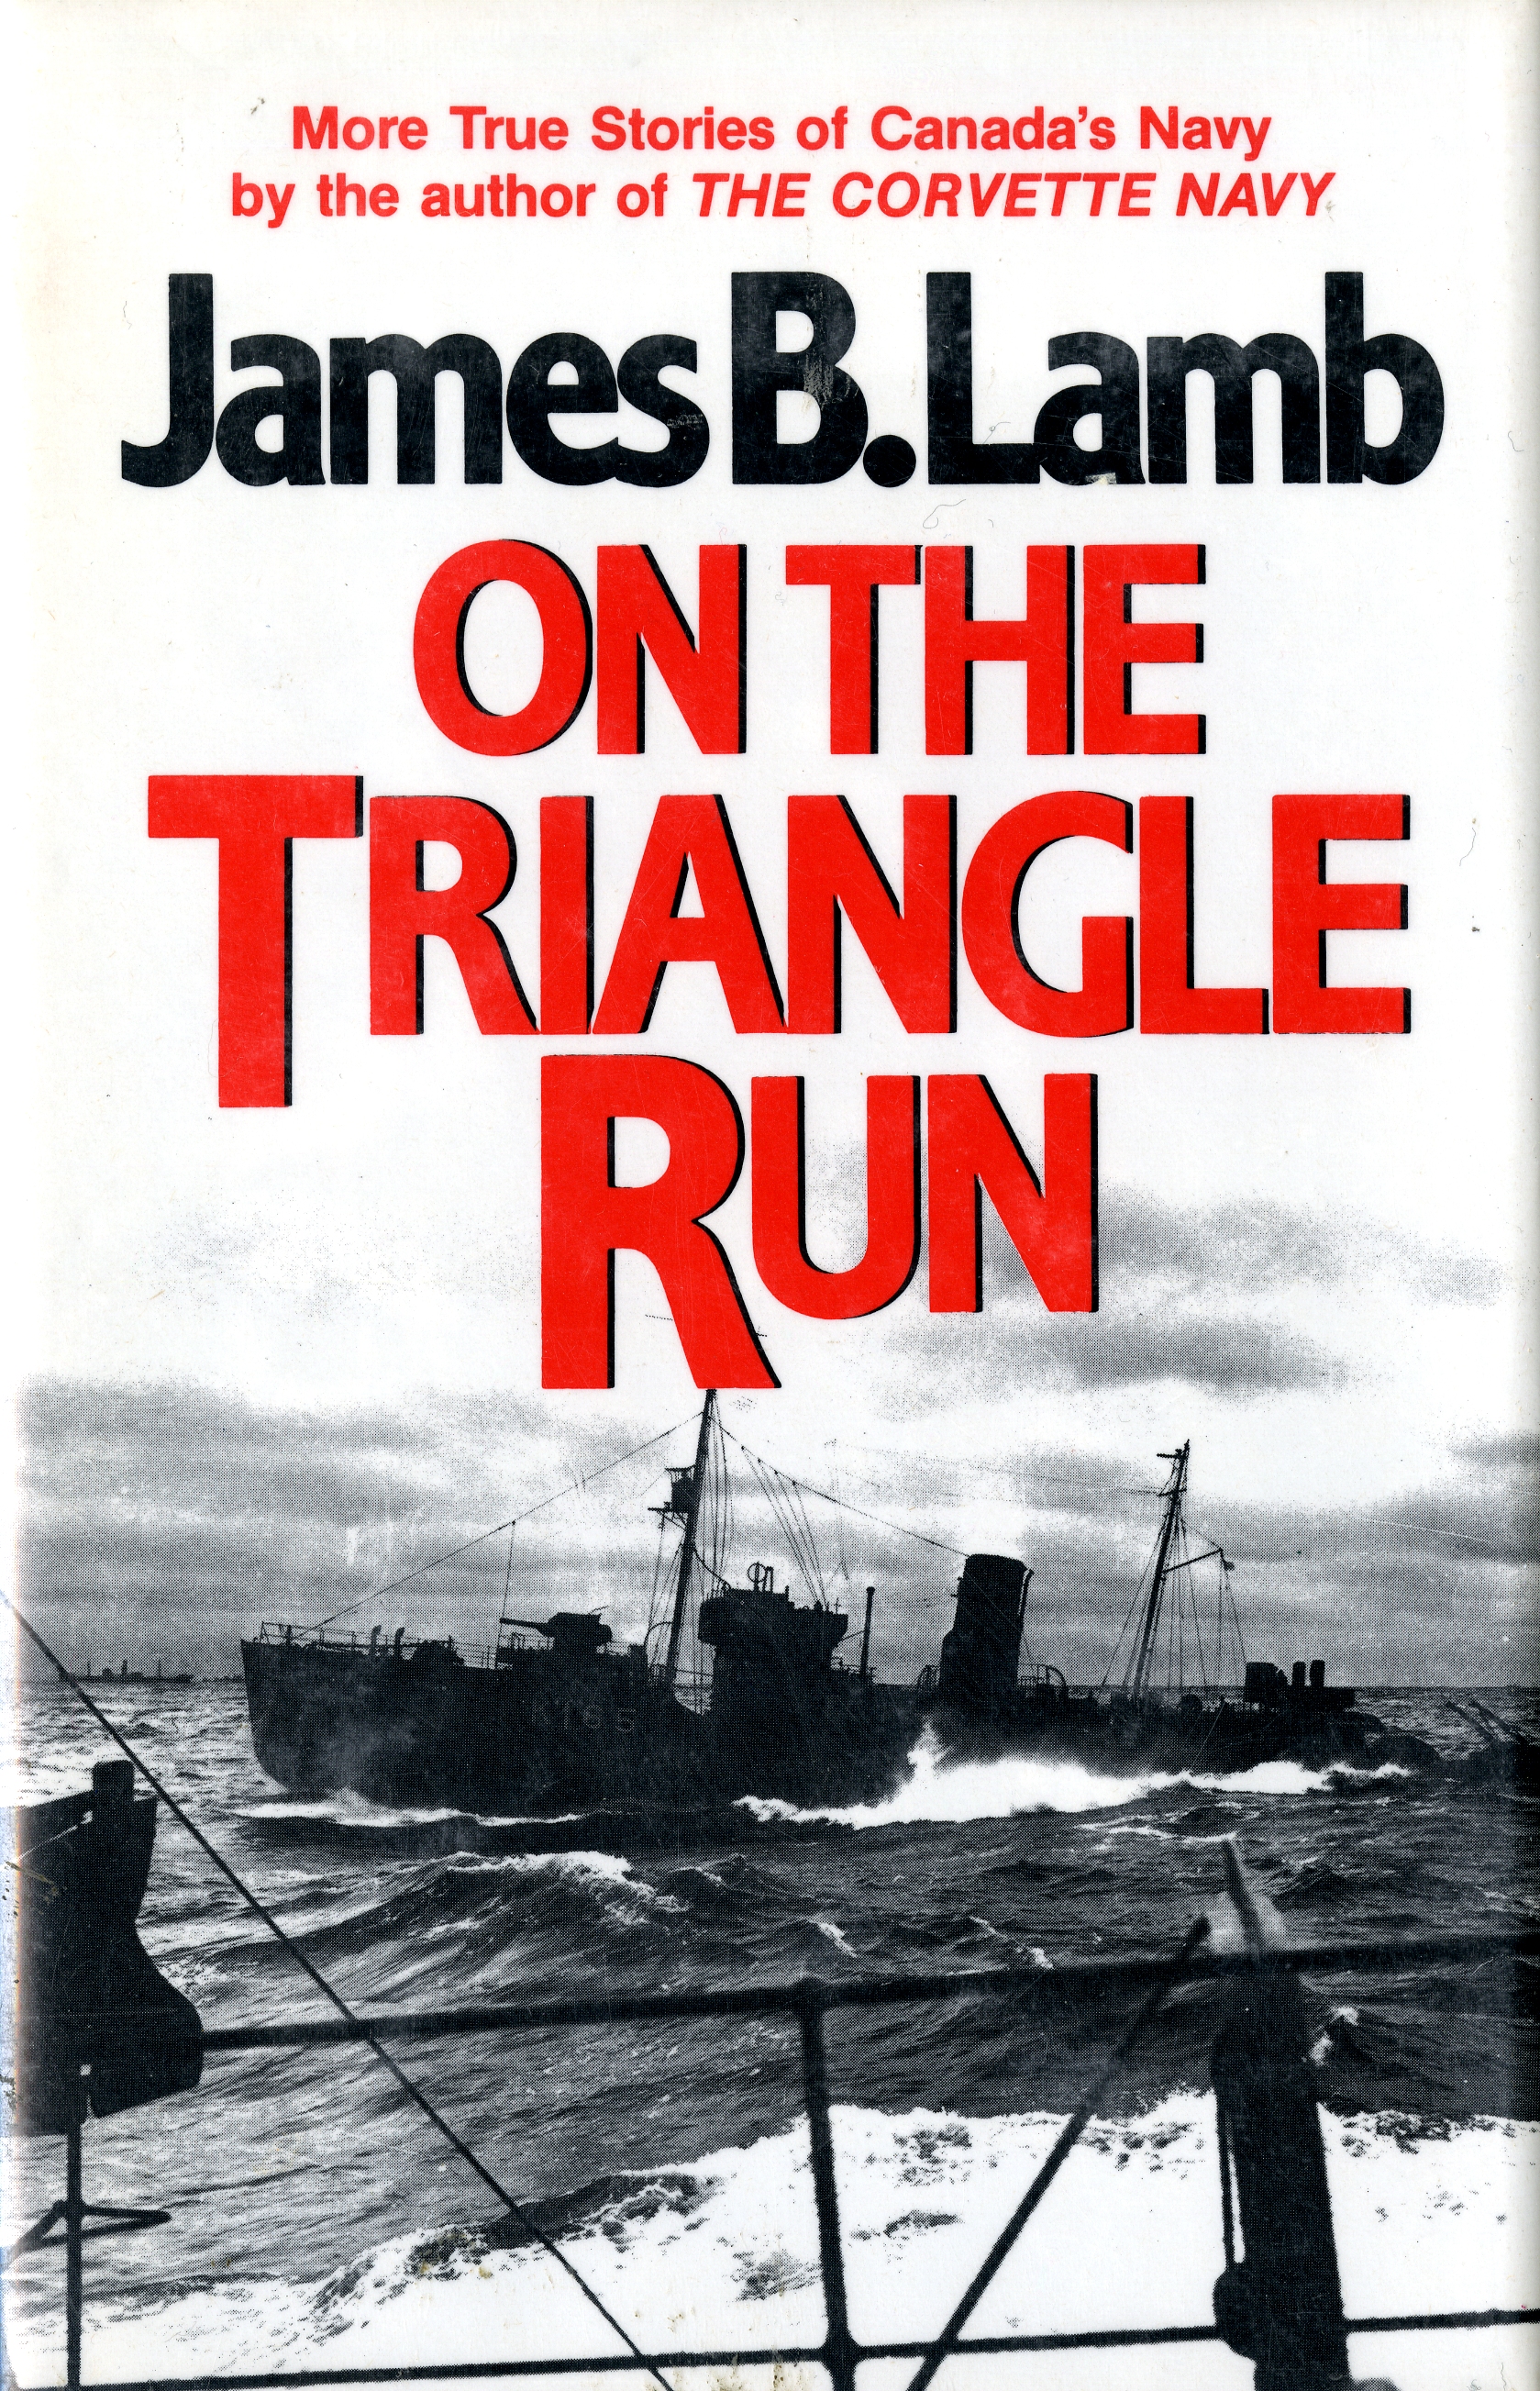 On The Triangle Run by James B. Lamb